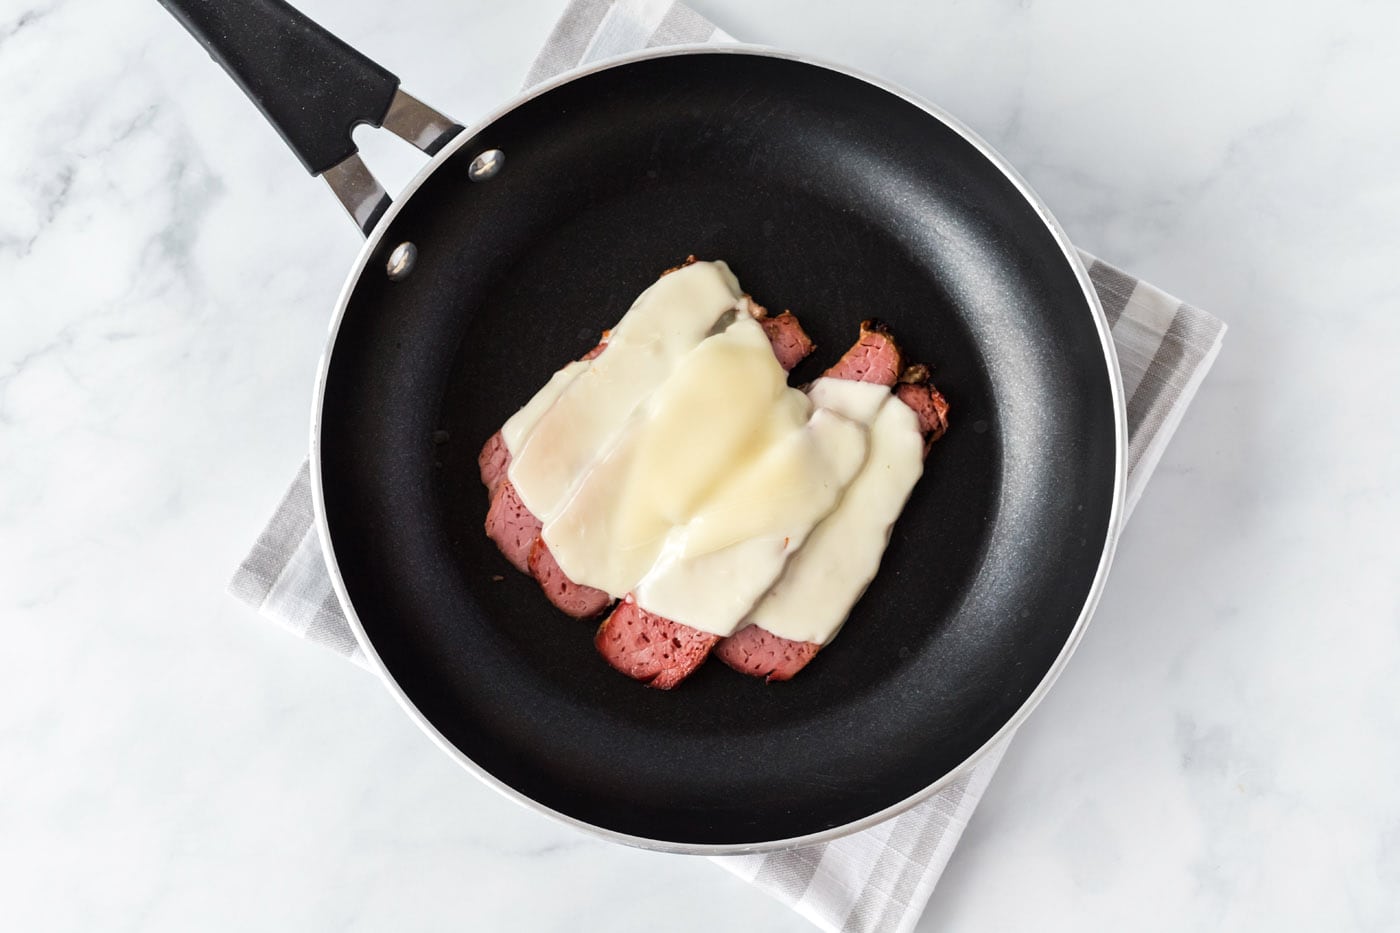 sliced corned beef with mozzarella cheese in a skillet